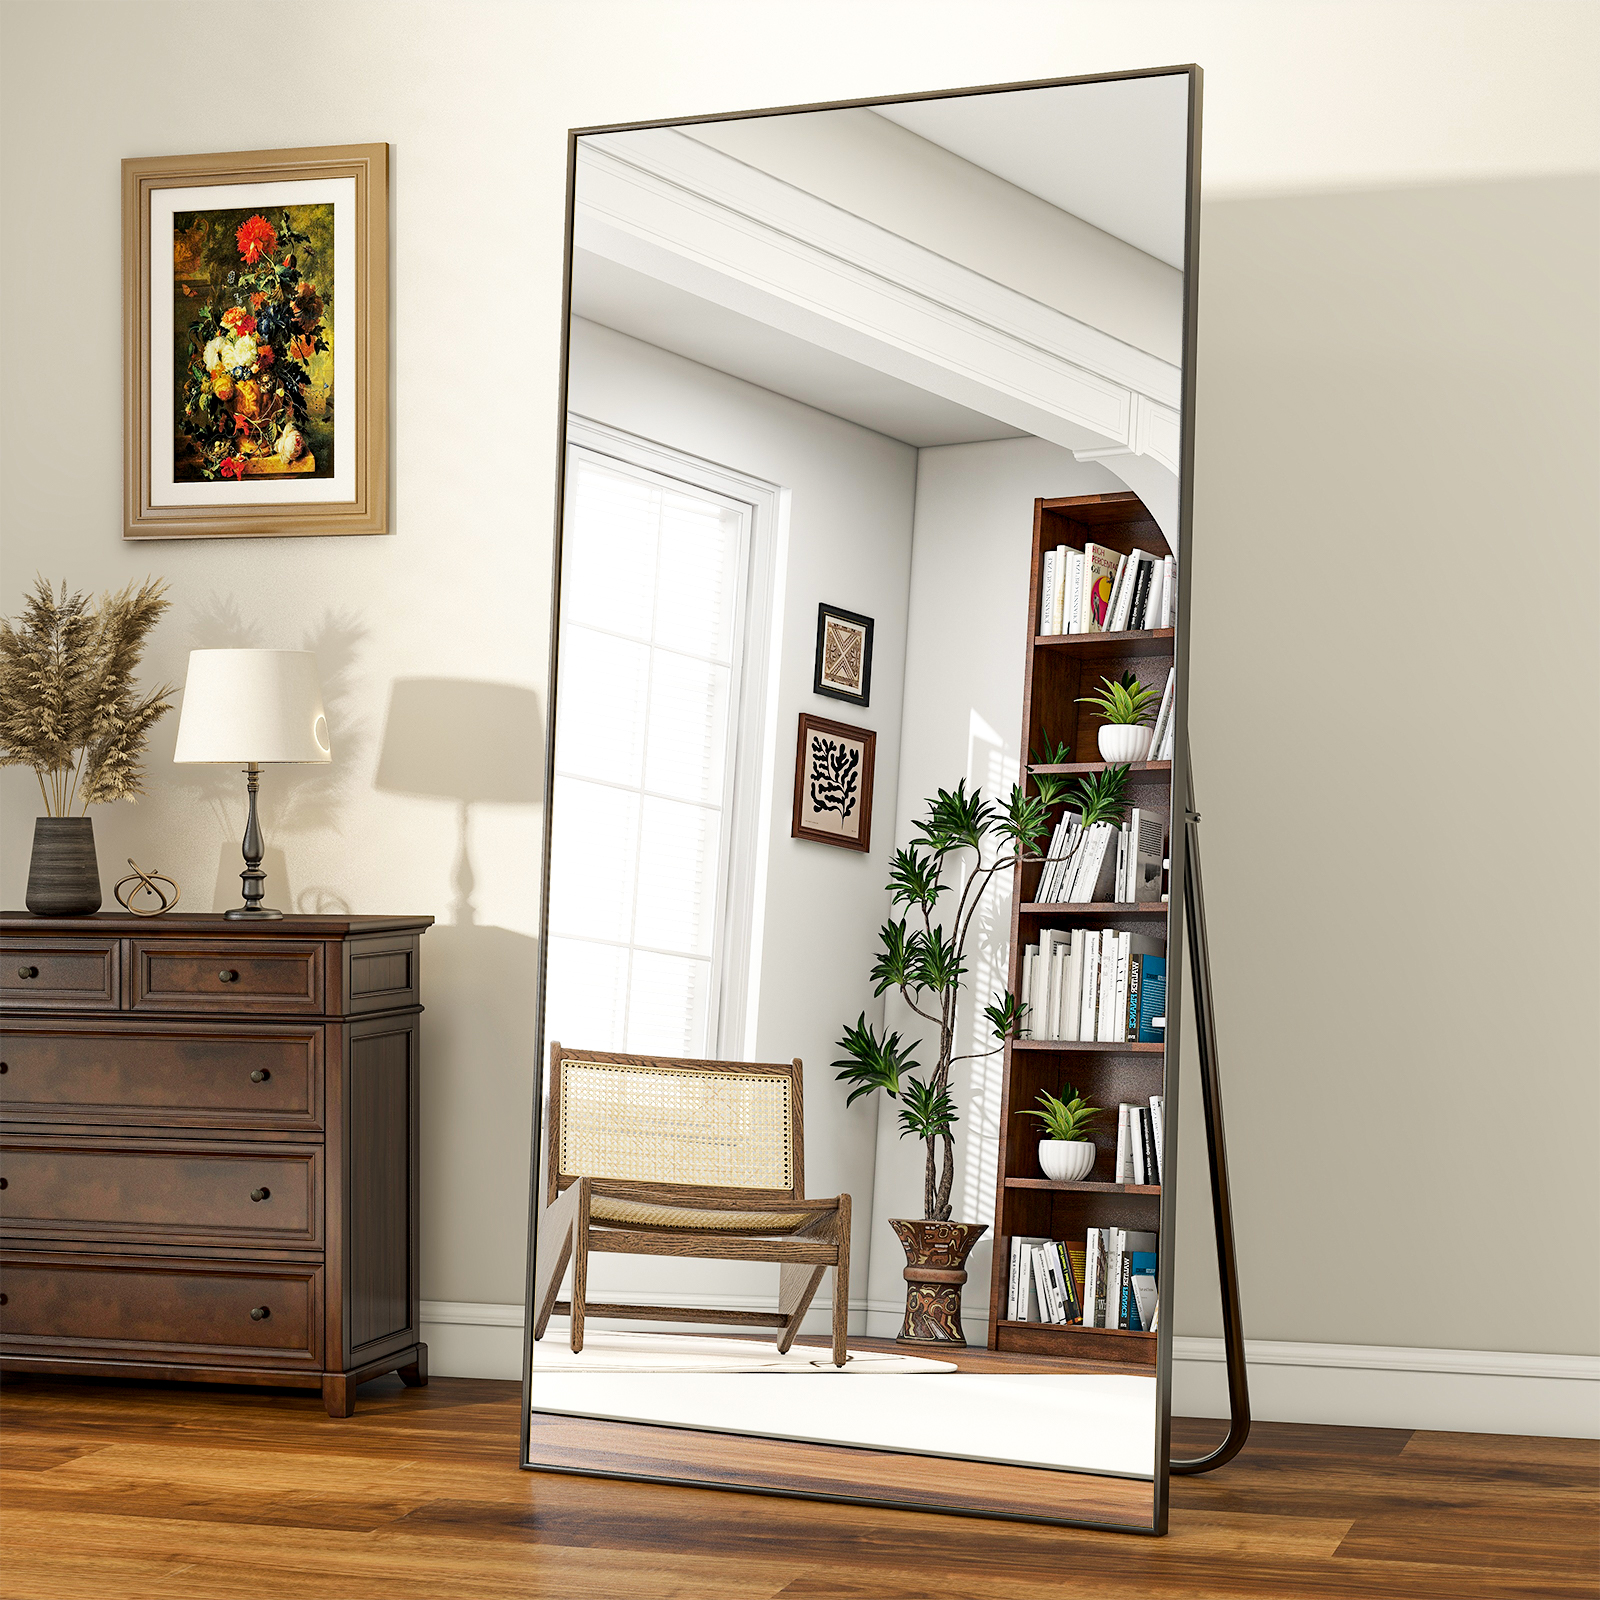 BEAUTYPEAK 76"x34" Full Length Mirror Rectangle Floor Mirrors for Standing Leaning or Hanging, Black - image 1 of 6